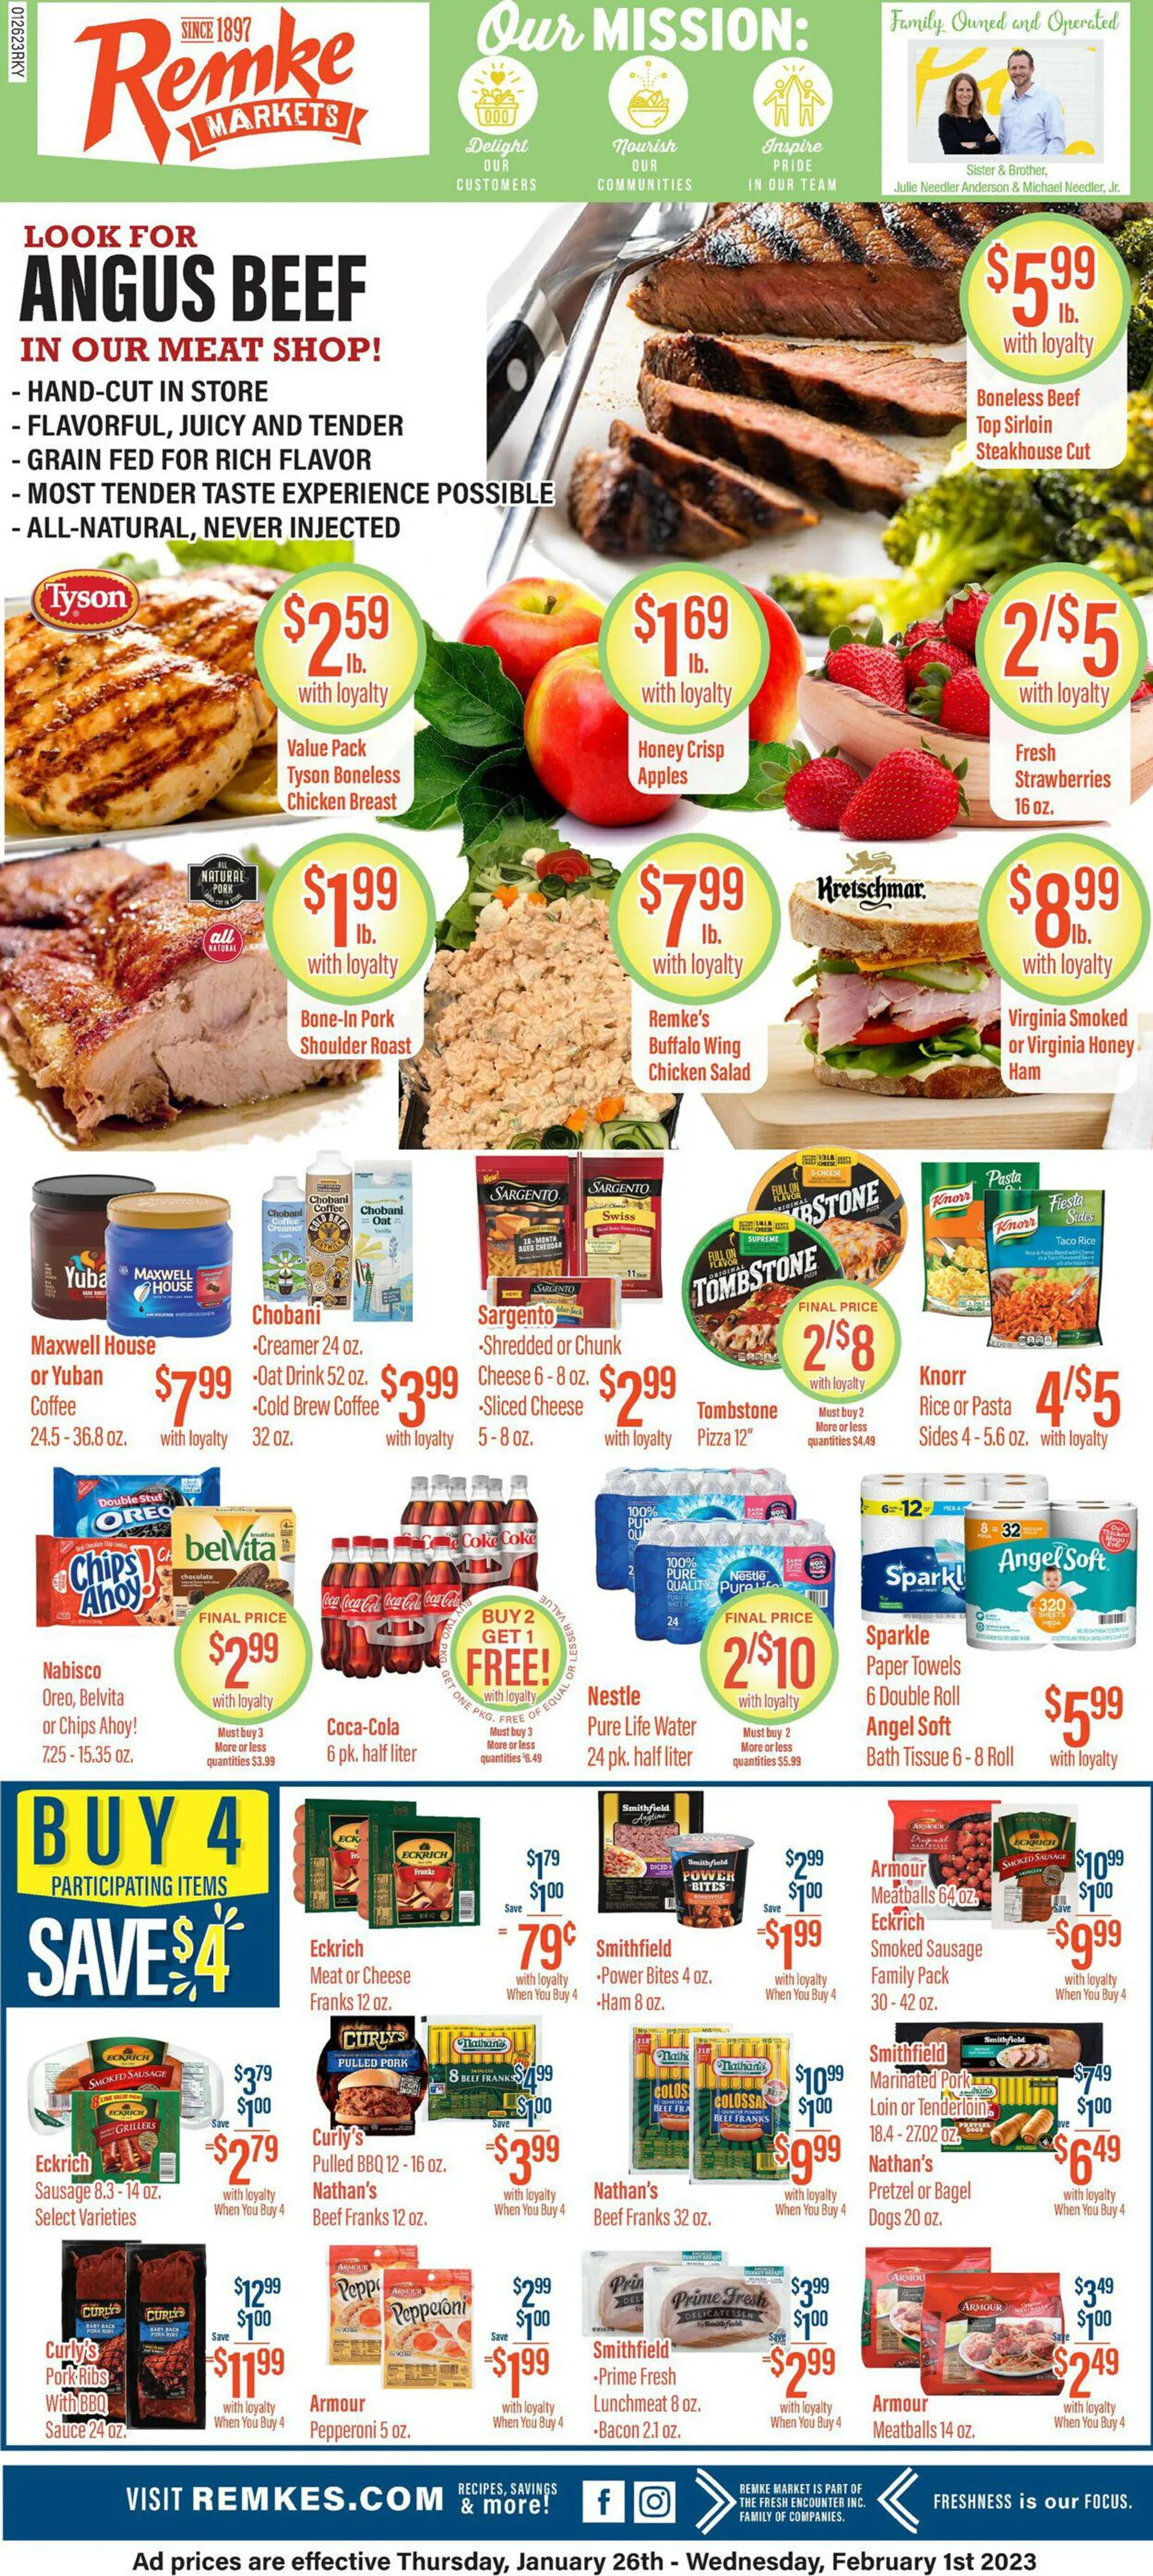 Remke Markets Current weekly ad - 2